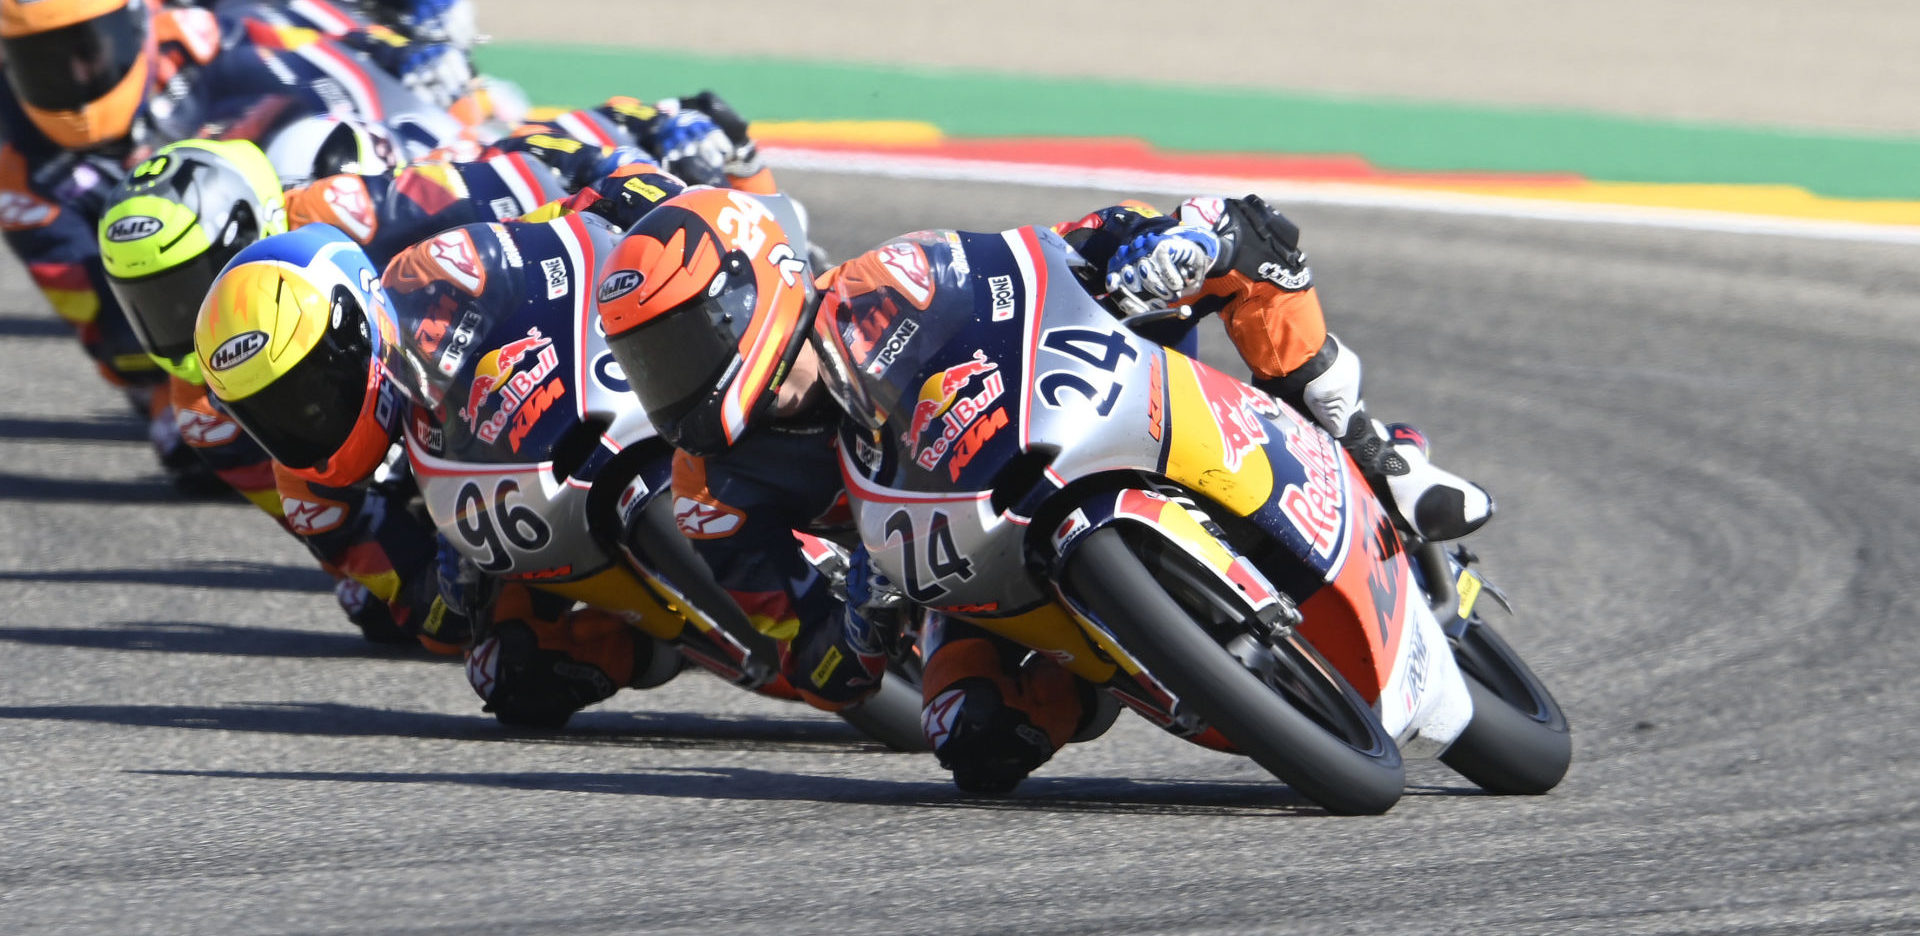 Ivan Ortola (24) leads Red Bull MotoGP Rookies Cup Race Two at Motorland Aragon. Photo courtesy Red Bull.